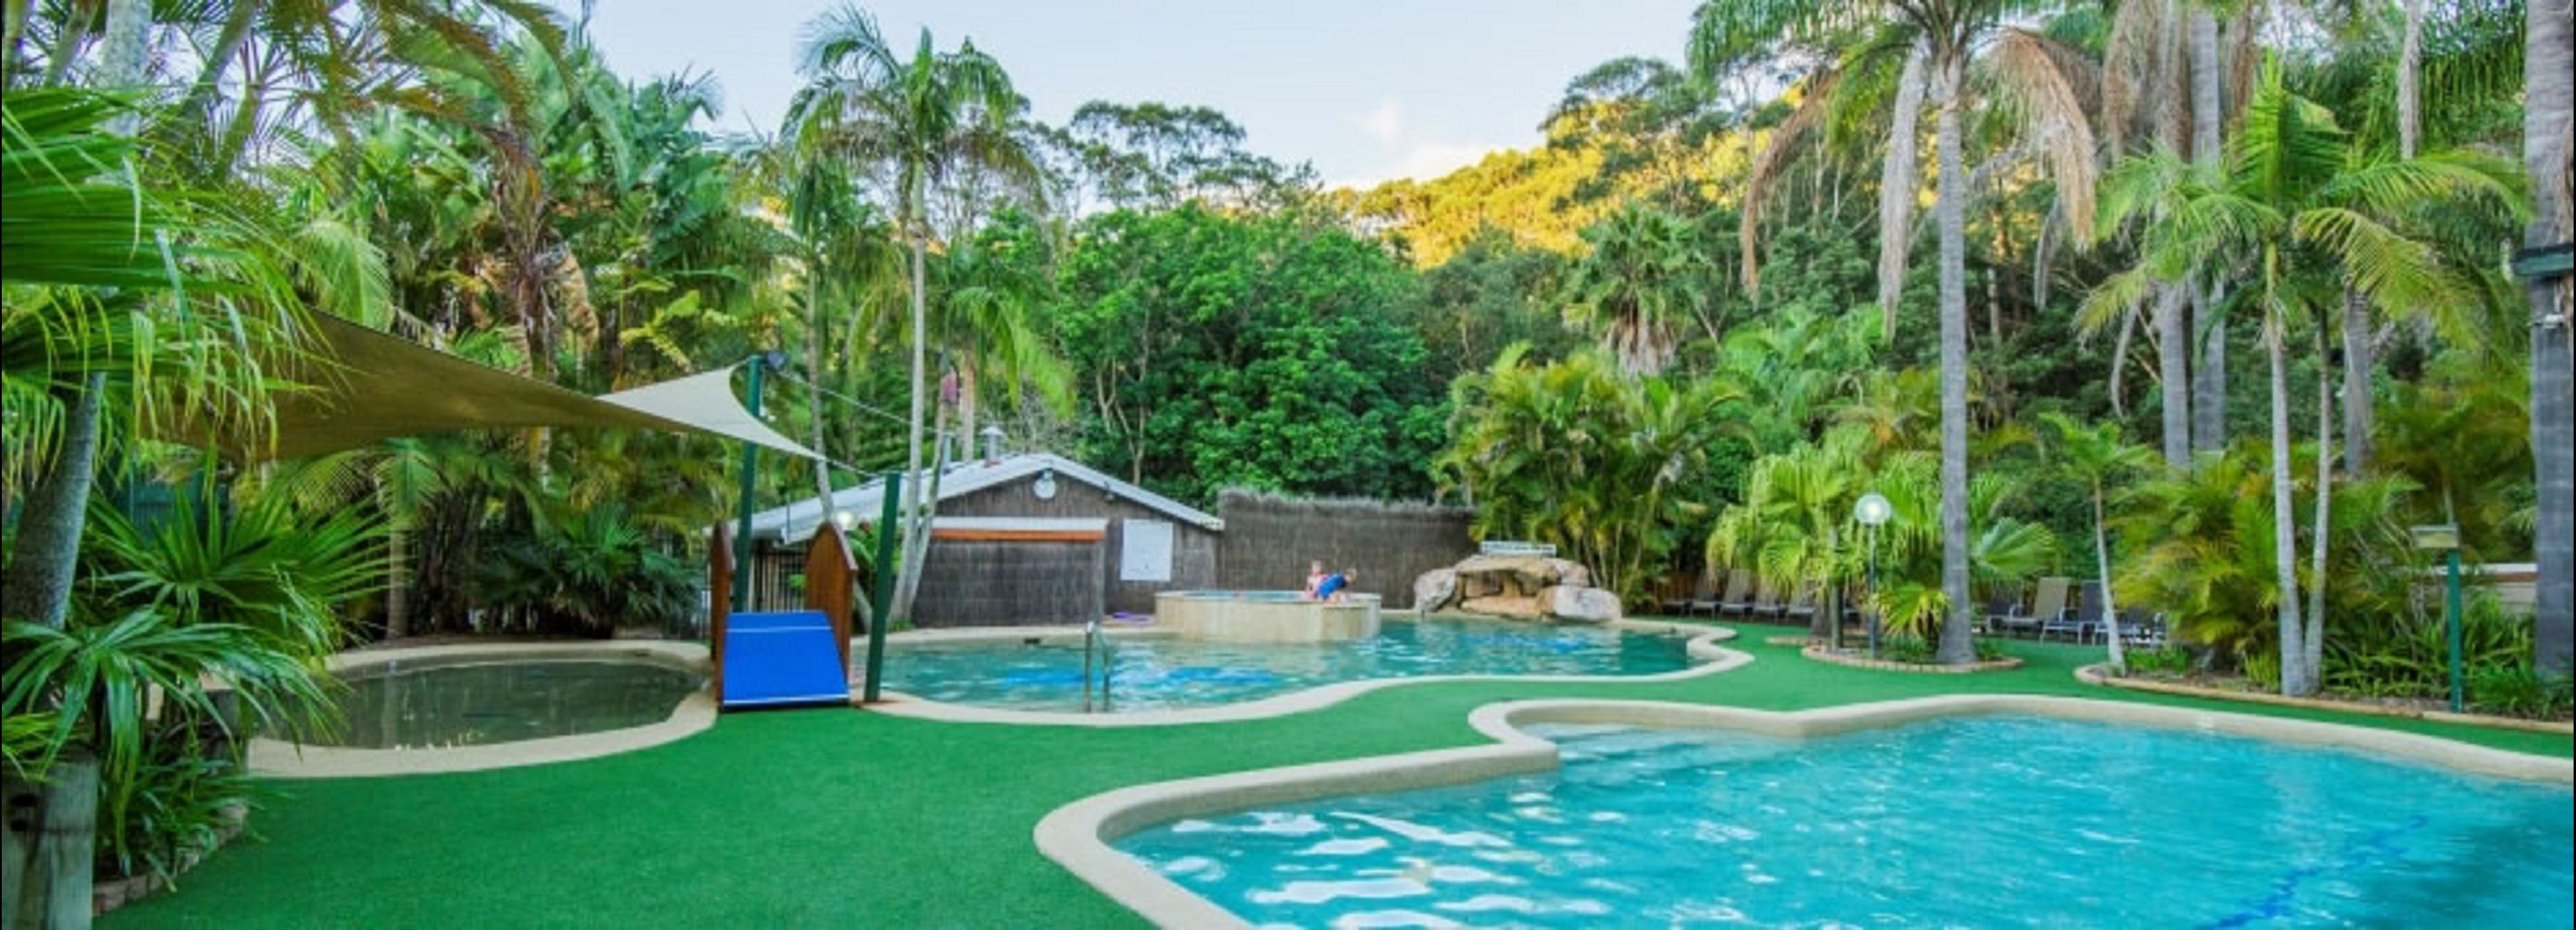 The Palms at Avoca - Accommodation Airlie Beach